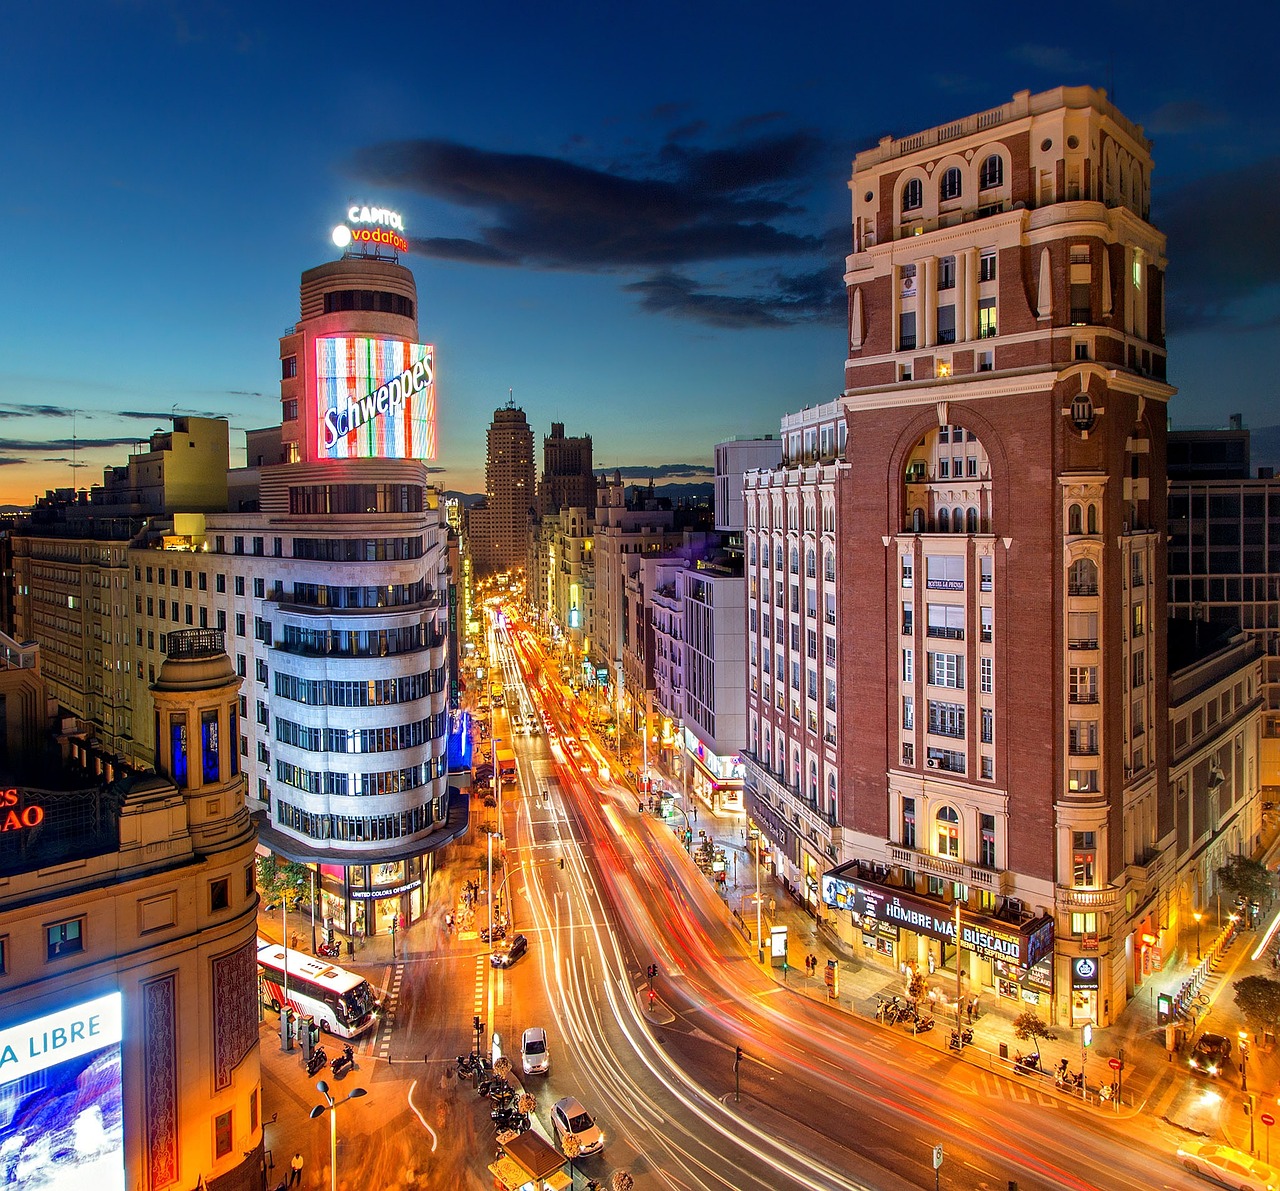 Madrid: Museums, Gastronomy, and Flamenco in 3 Days